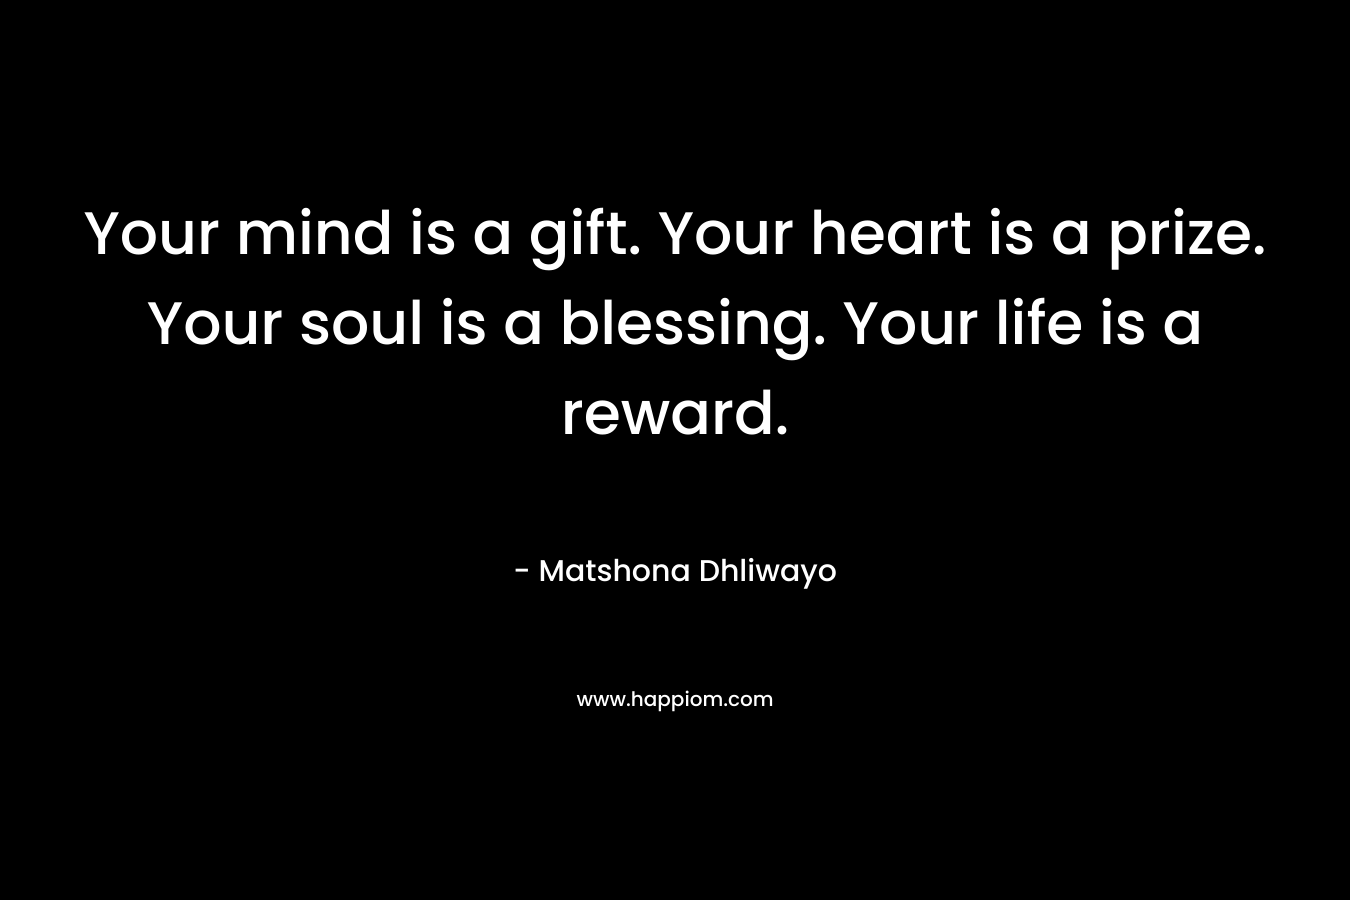 Your mind is a gift. Your heart is a prize. Your soul is a blessing. Your life is a reward.